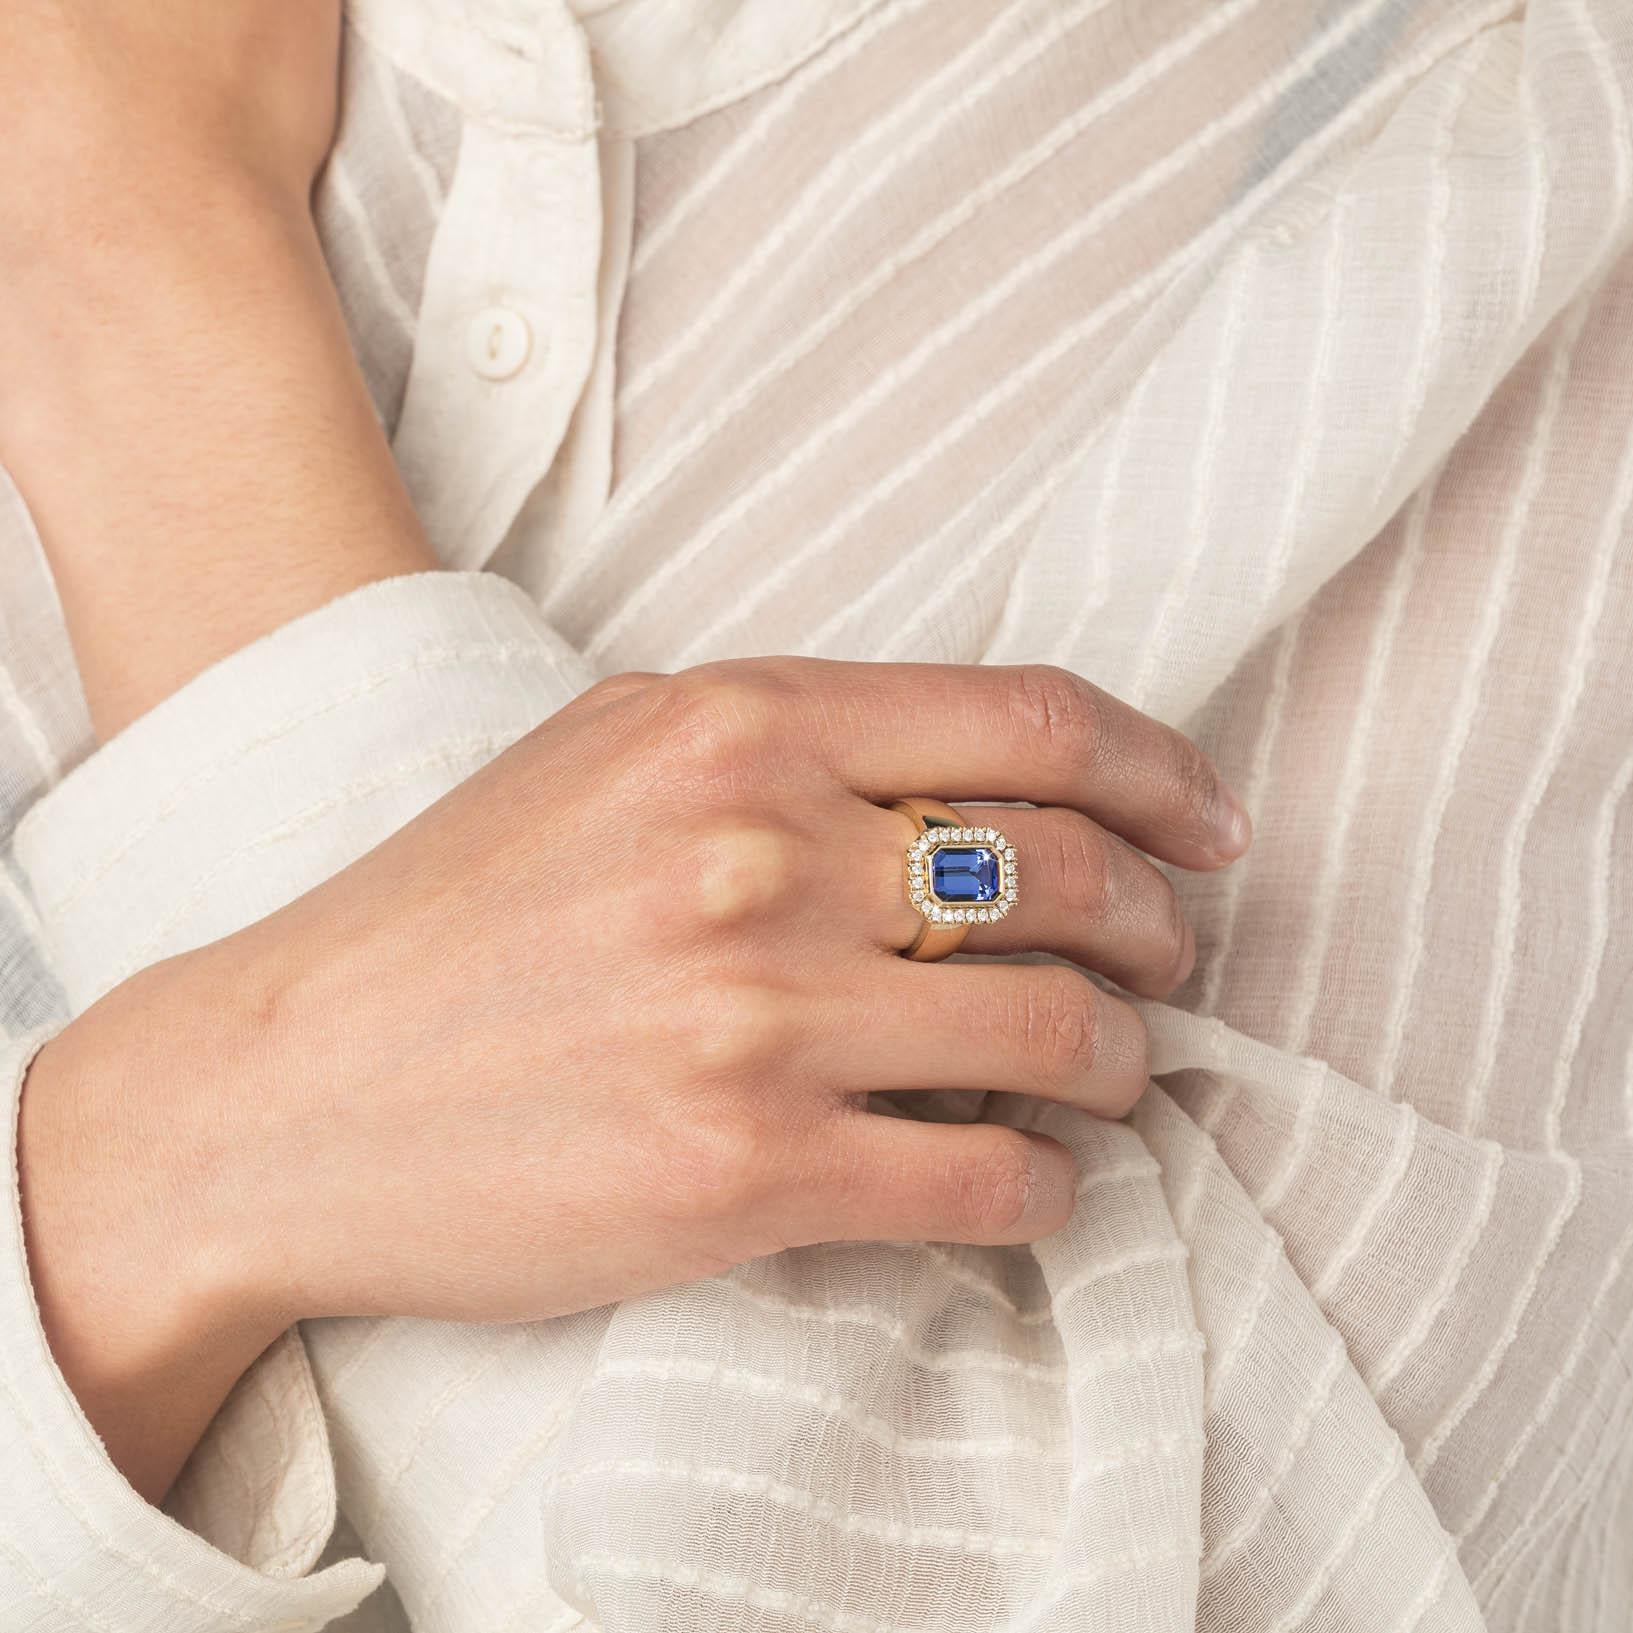 We invite you to see more of our collection from Cober Jewellery at 1stDibs!
You can type Cober Jewellery in the search bar to view more of our pieces of jewellery at our webshop.

Handmade 14 Carat Yellow Gold Ring with a 2.58ct Tanzanite,